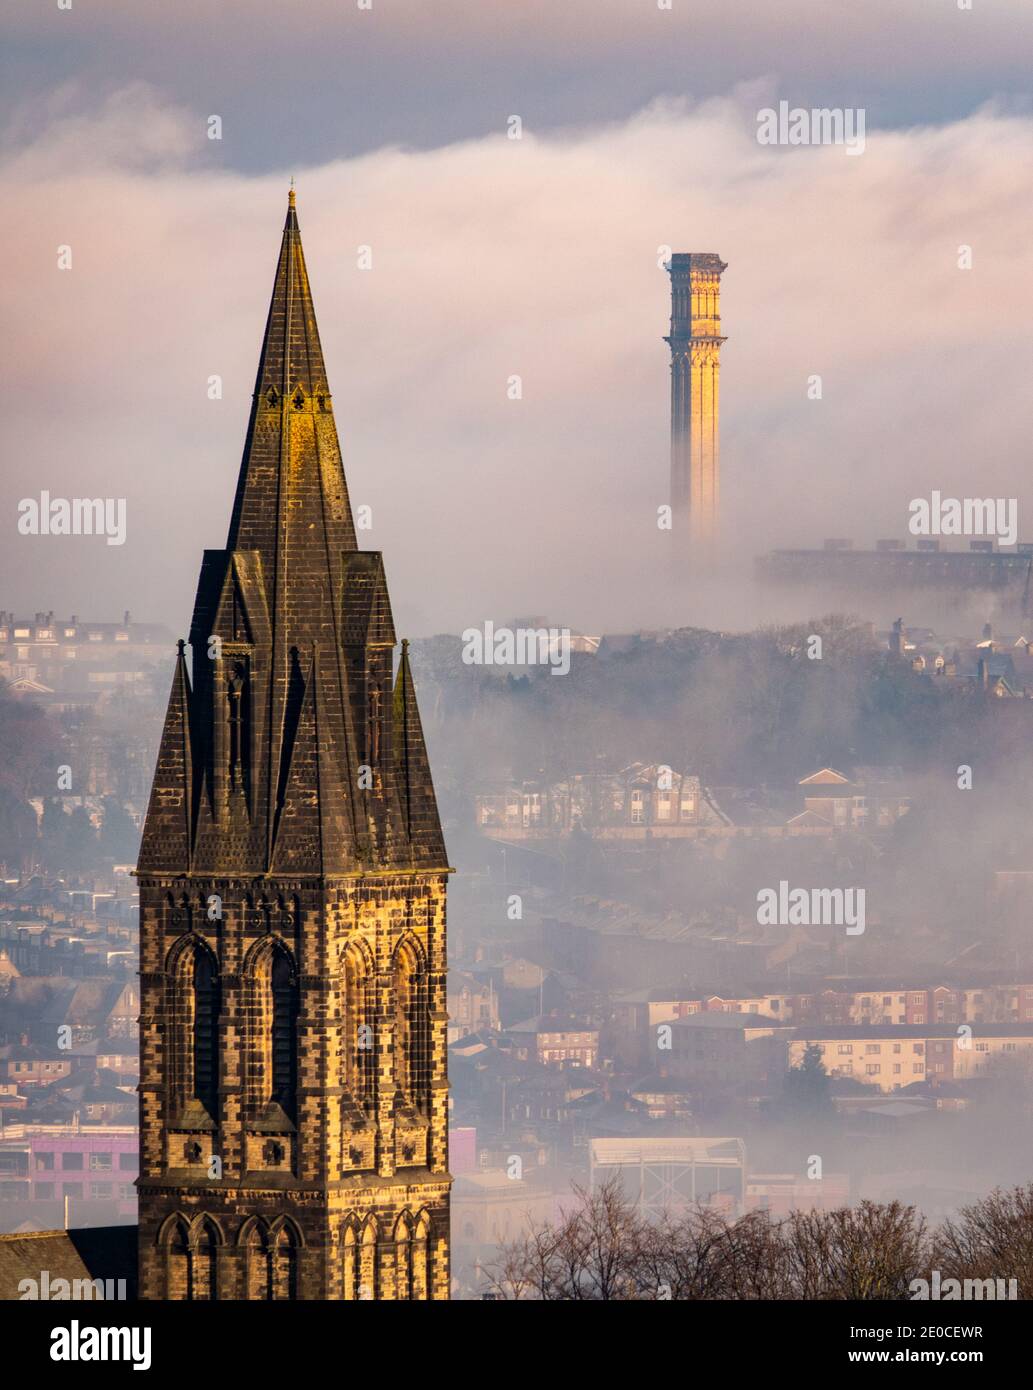 Bradford, West Yorkshire, UK. 31st Dec, 2020. Misty views across the valley in Bradford as the UK continues with a cold spell. The mighty industrial chimney of the former Listers Mill can be seen, catching the sunshine as it rises out of the fog. Credit: Mick Flynn/Alamy Live News Stock Photo